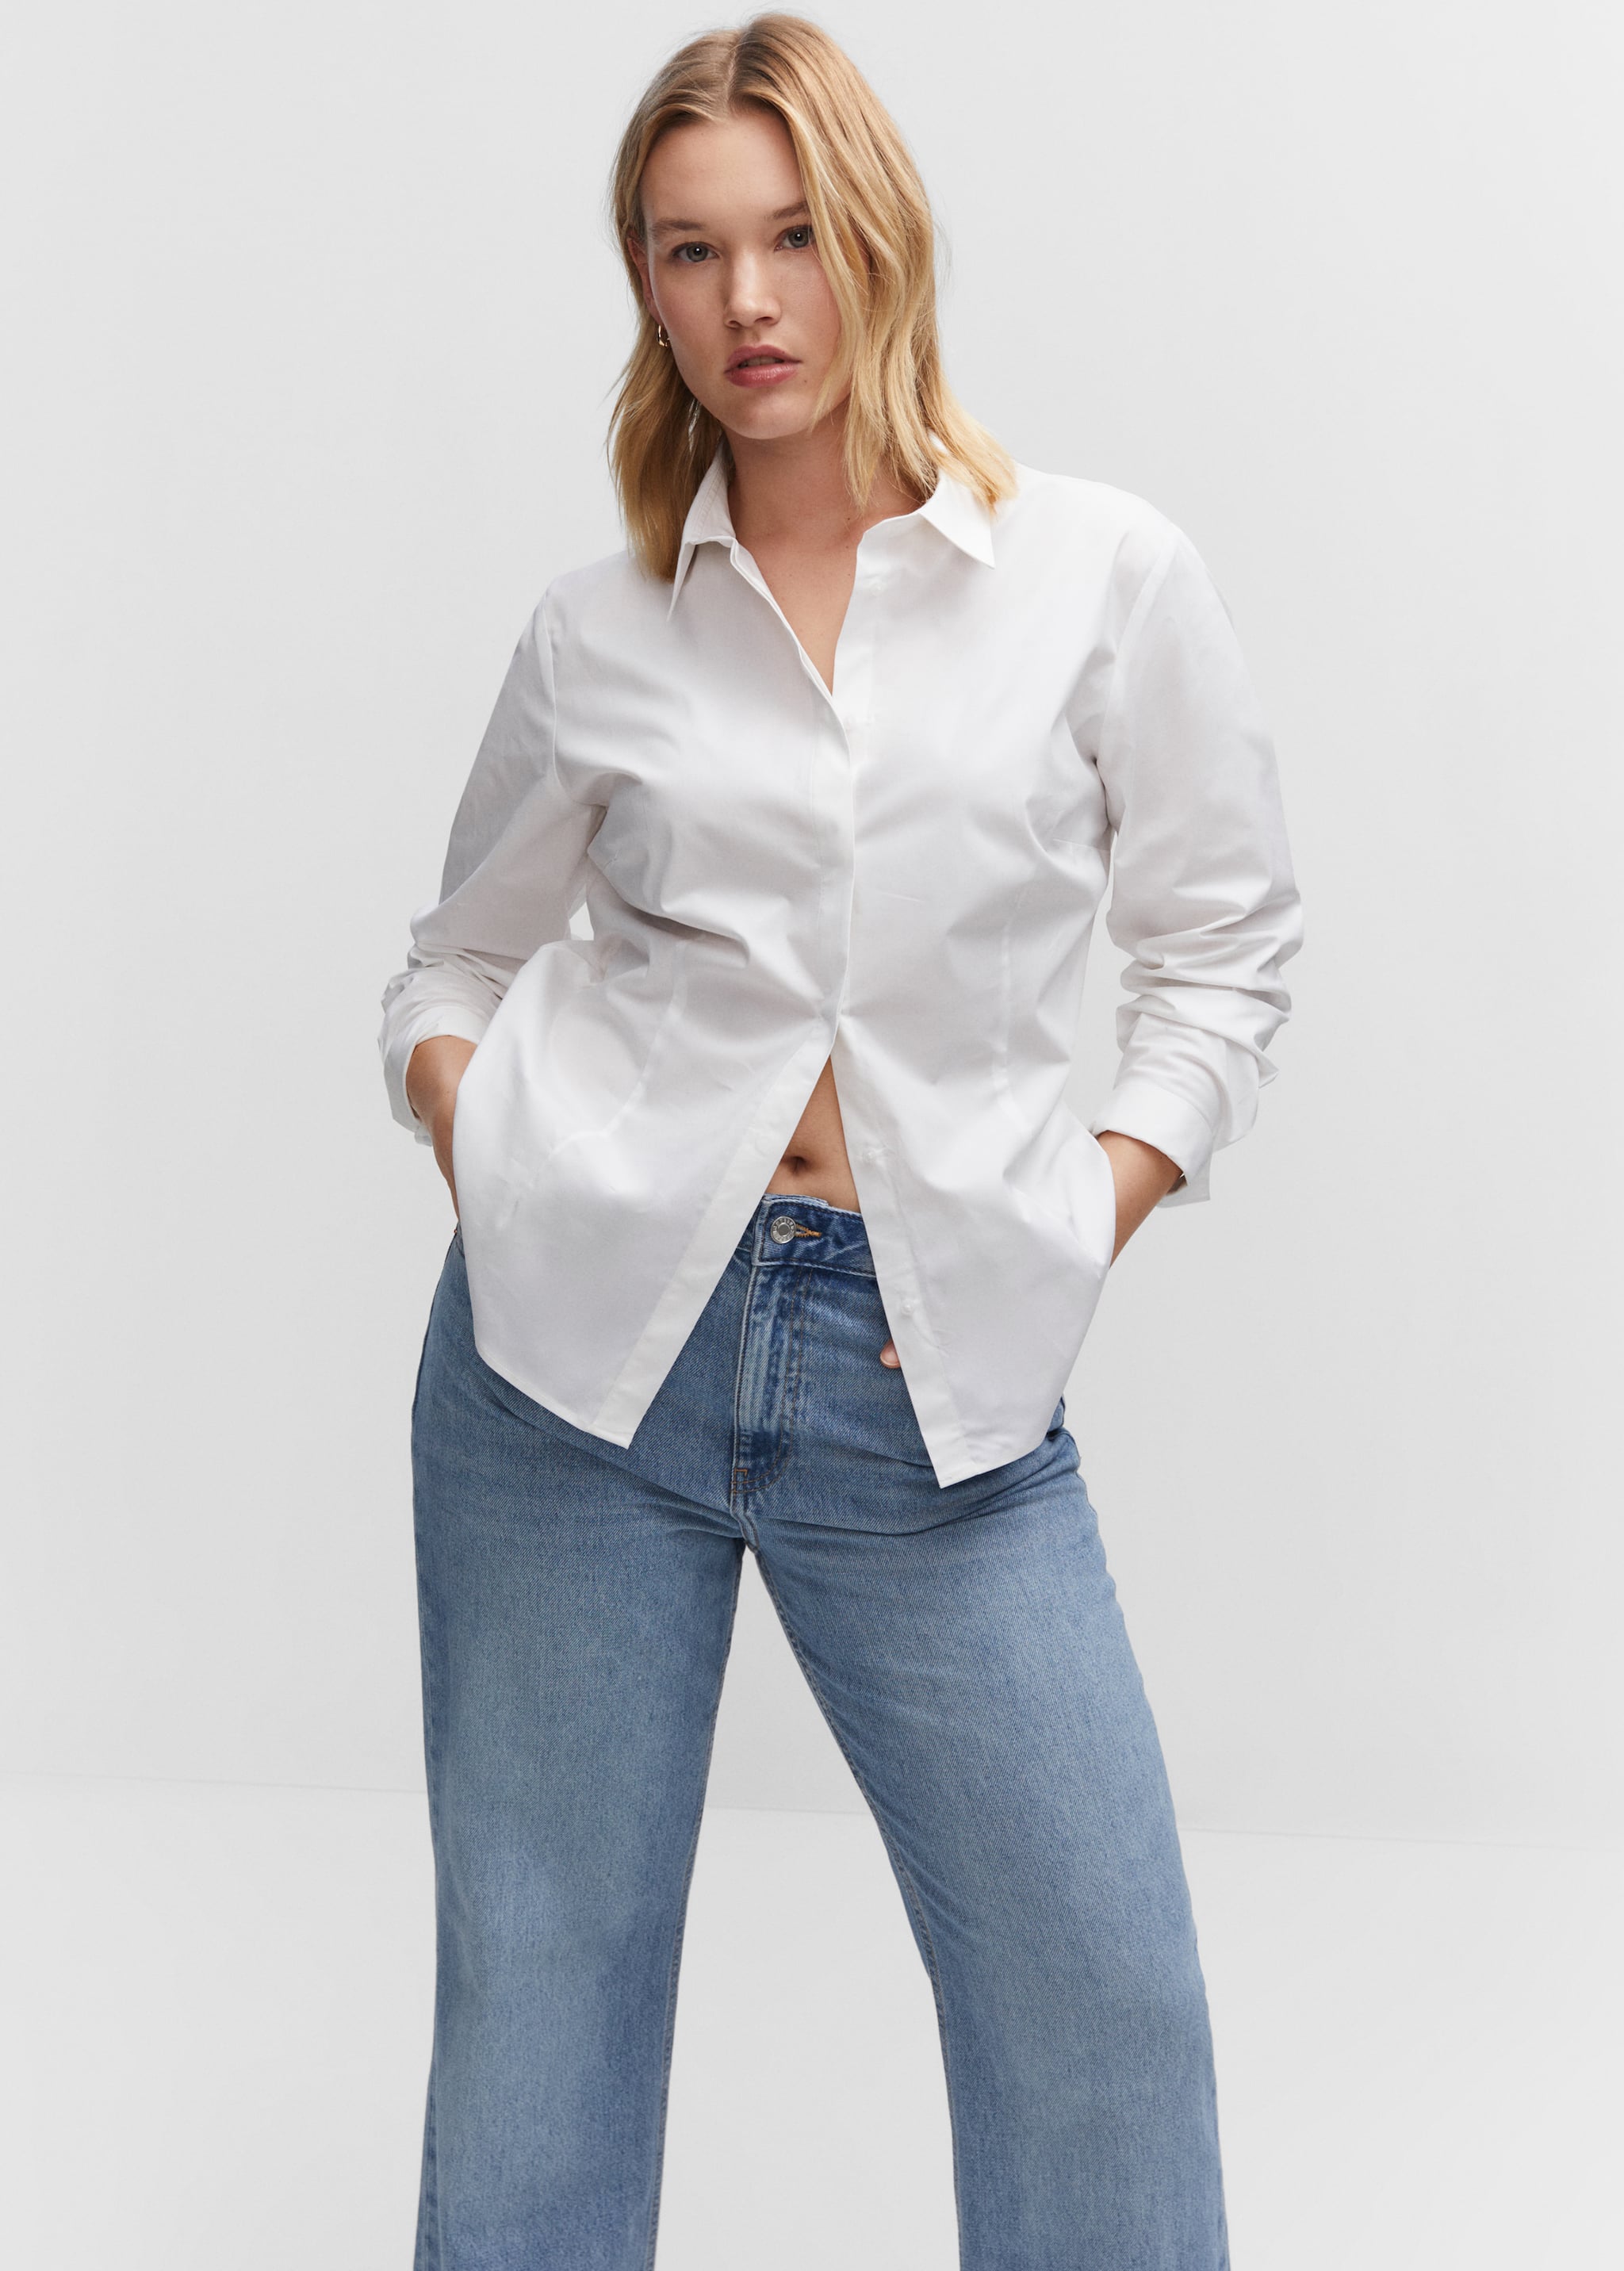 Fitted cotton shirt - Details of the article 5